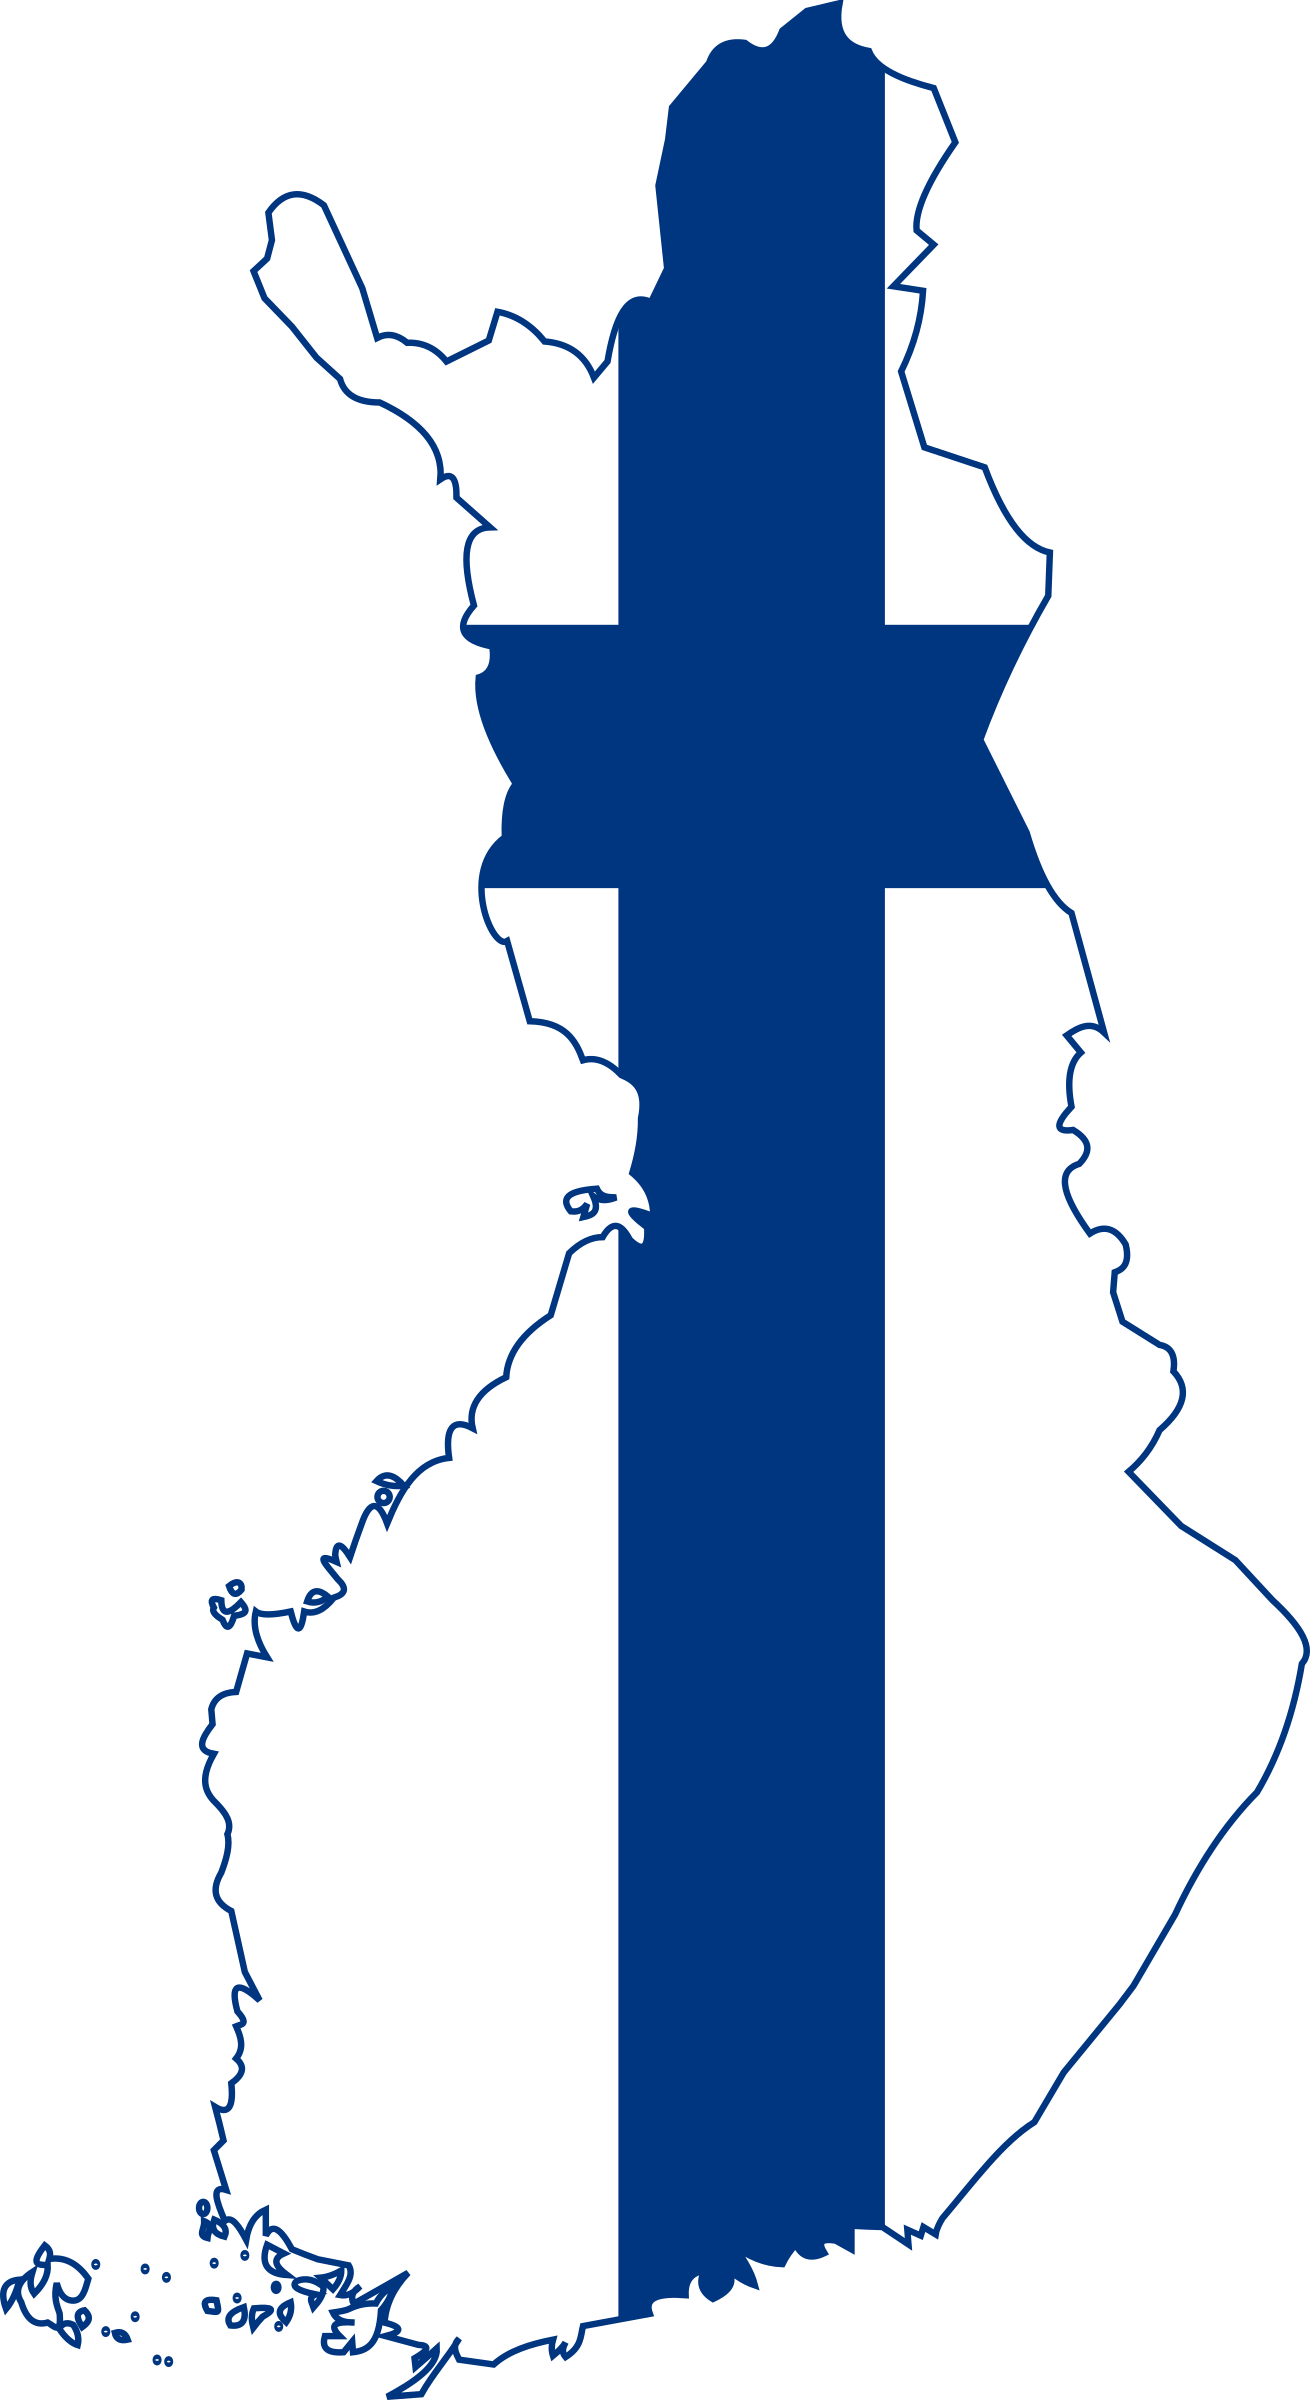 Clipart - Finland map with flag